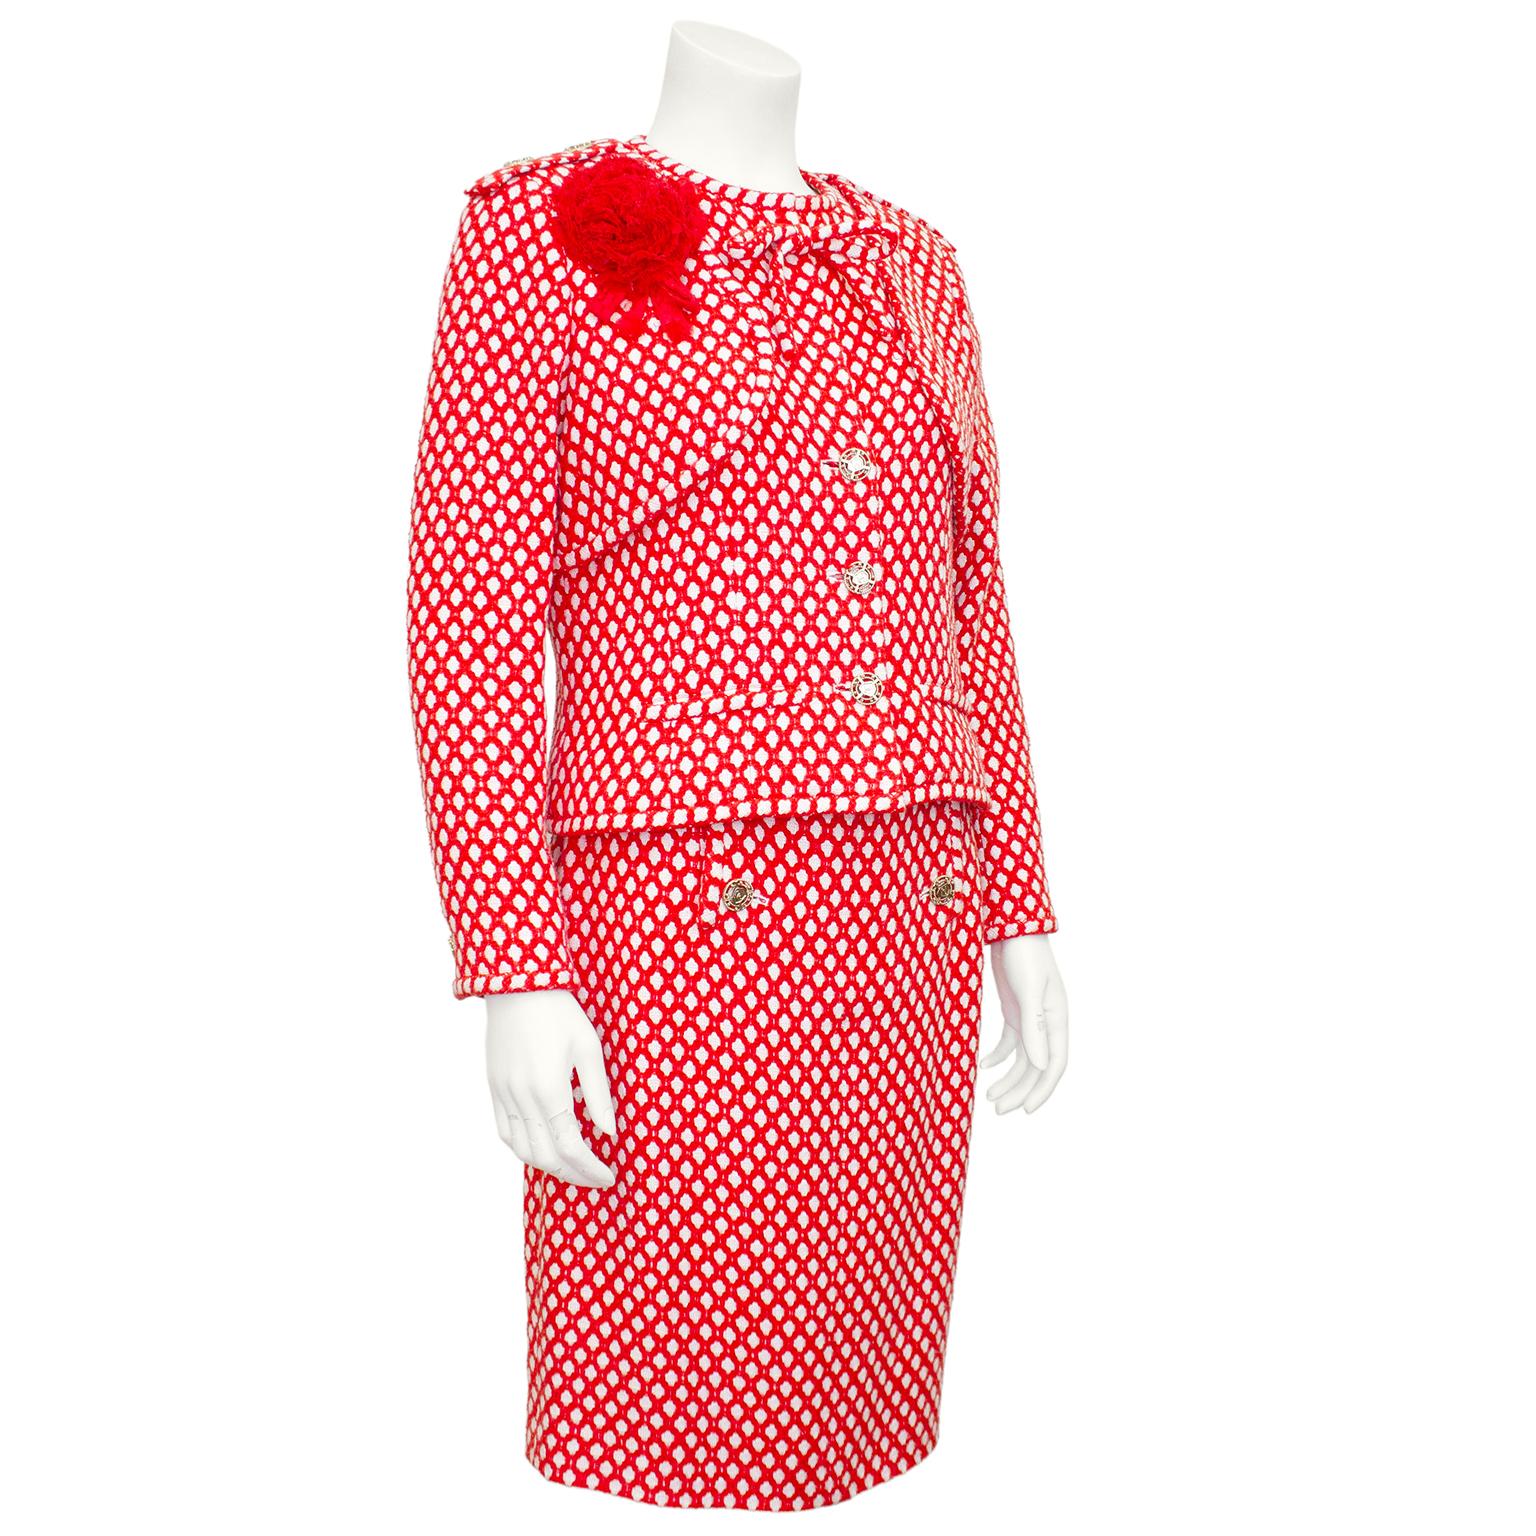 Stunning Chanel skirt suit from the Spring 2008 collection. Vibrant red and white tweed that almost looks like a trellis from a distance. Jacket is collarless with a bow at neckline. Epaulets with silver CC logo buttons featuring a shield motif. Cut